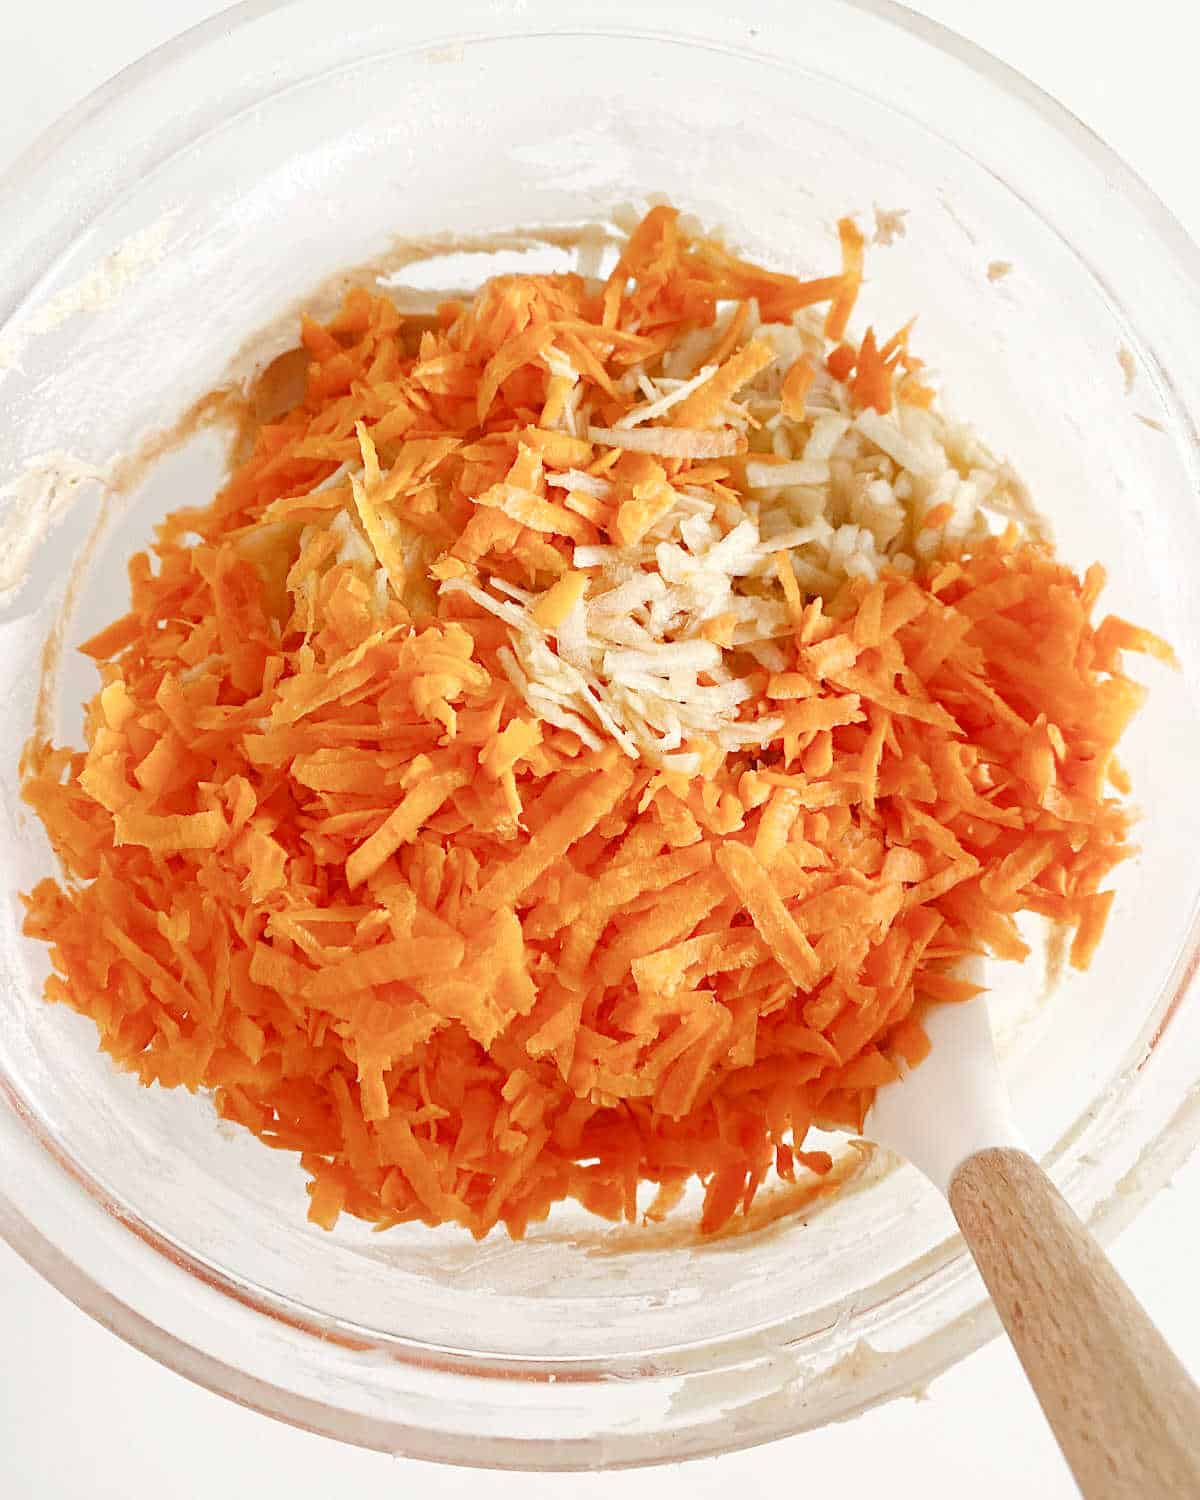 Grated carrot added to cake batter in a glass bowl with a white wooden spatula. White surface.